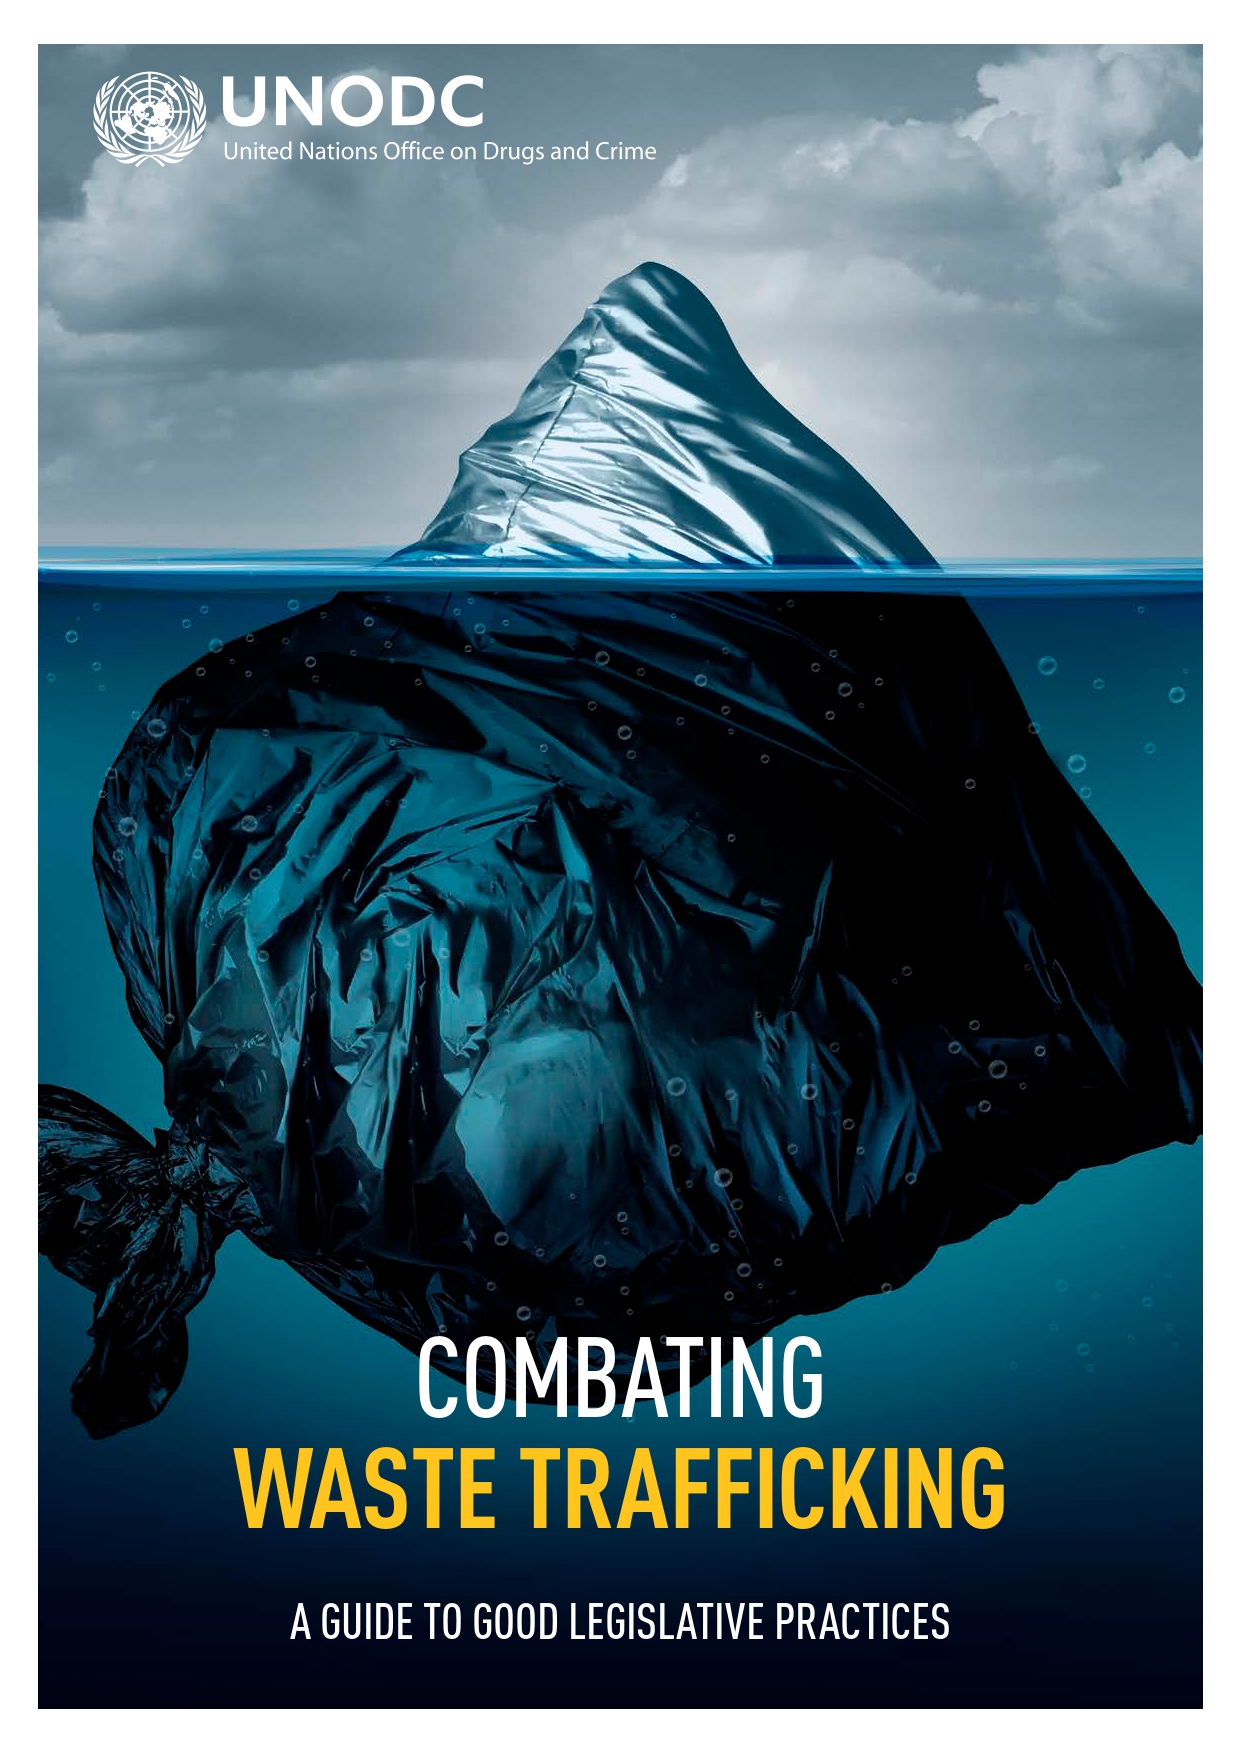 <div style="text-align: center;"> </div>
<div style="text-align: center;">Combating Waste Trafficking: A Guide to Good Legislative Practices</div>
<div style="text-align: center;">(<a href="/cld/uploads/pdf/Combating_Waste_Trafficking_-_Guide_on_Good_Legislative_Practices_-_EN.pdf">E</a> - <a href="https://www.unodc.org/documents/organized-crime/tools_and_publications/22-01340F_ebook_final_Rev.pdf">F</a> - <a href="/cld/uploads/pdf/ALBANIAN_.pdf">Albanian</a> - <a href="/cld/uploads/pdf/MACADONIAN.pdf">Macedonian</a> - <a href="https://sherloc.unodc.org/cld/uploads/pdf/Waste_Trafficking_BCSM.pdf">BCSM</a>)</div>